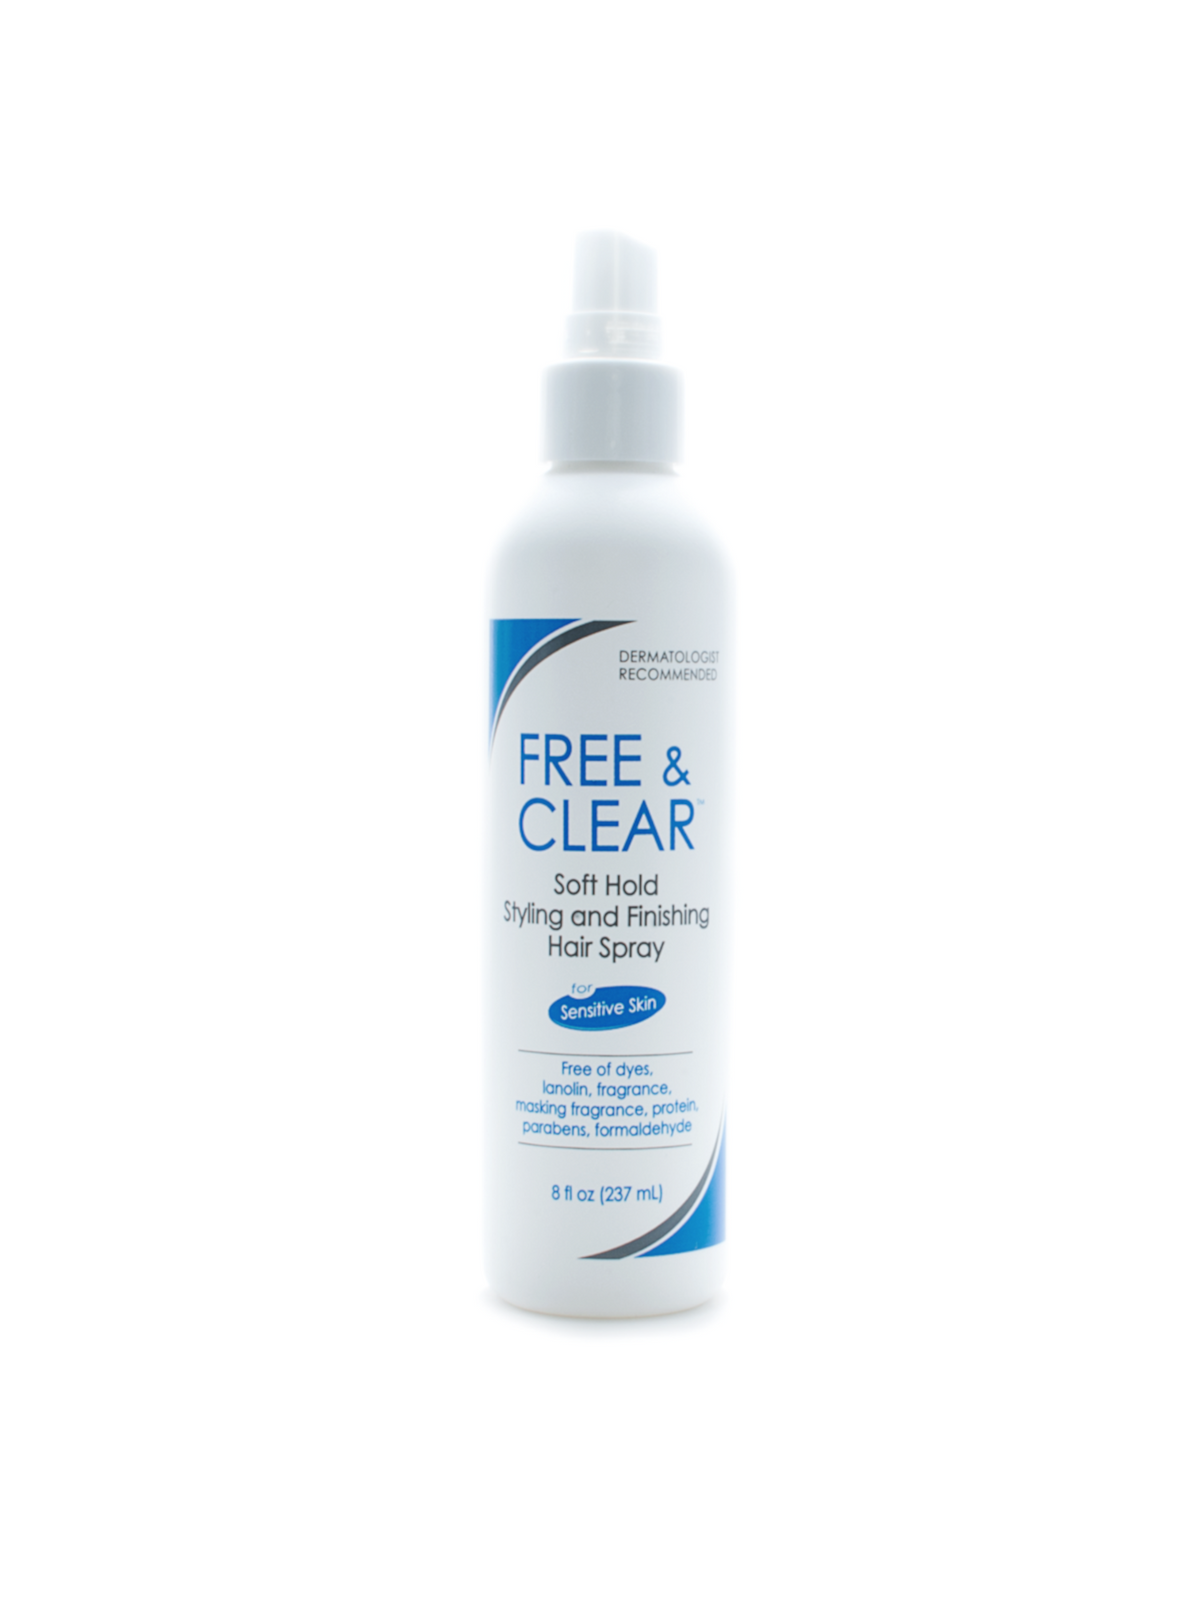 Free and clear hair spray soft